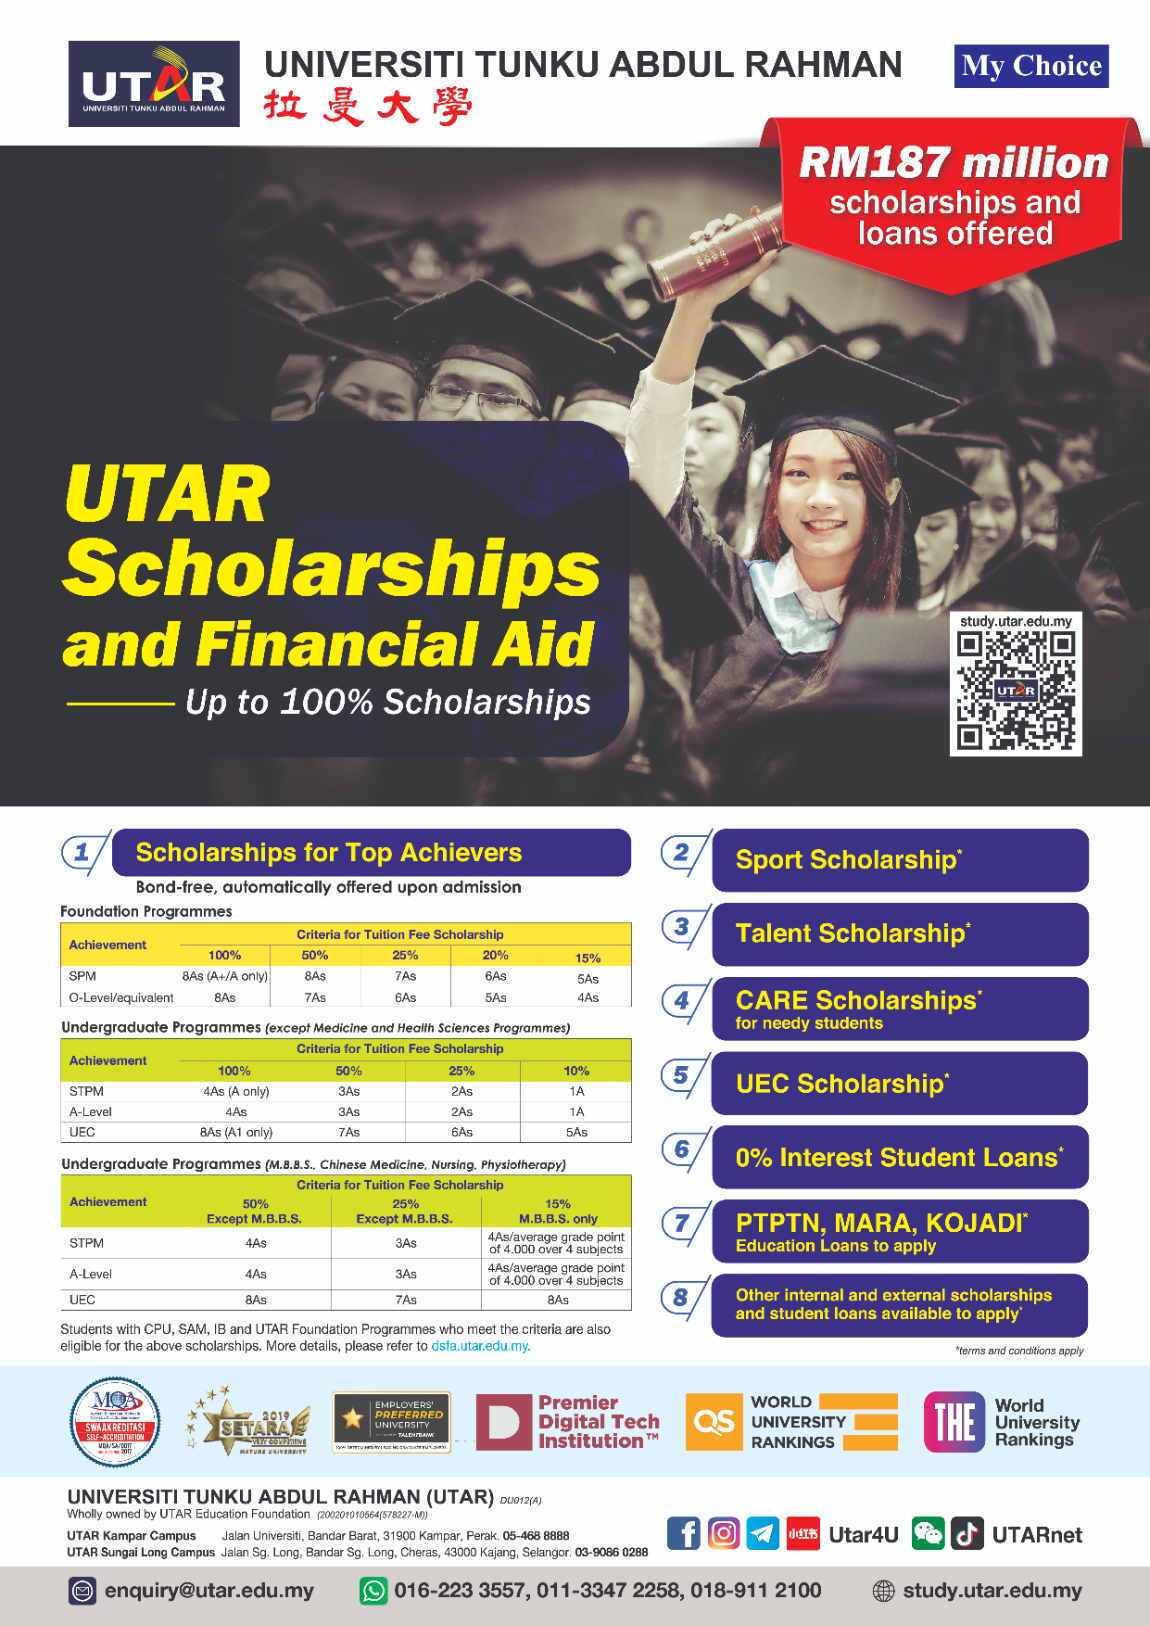 UTAR Scholarships and Financial Aid